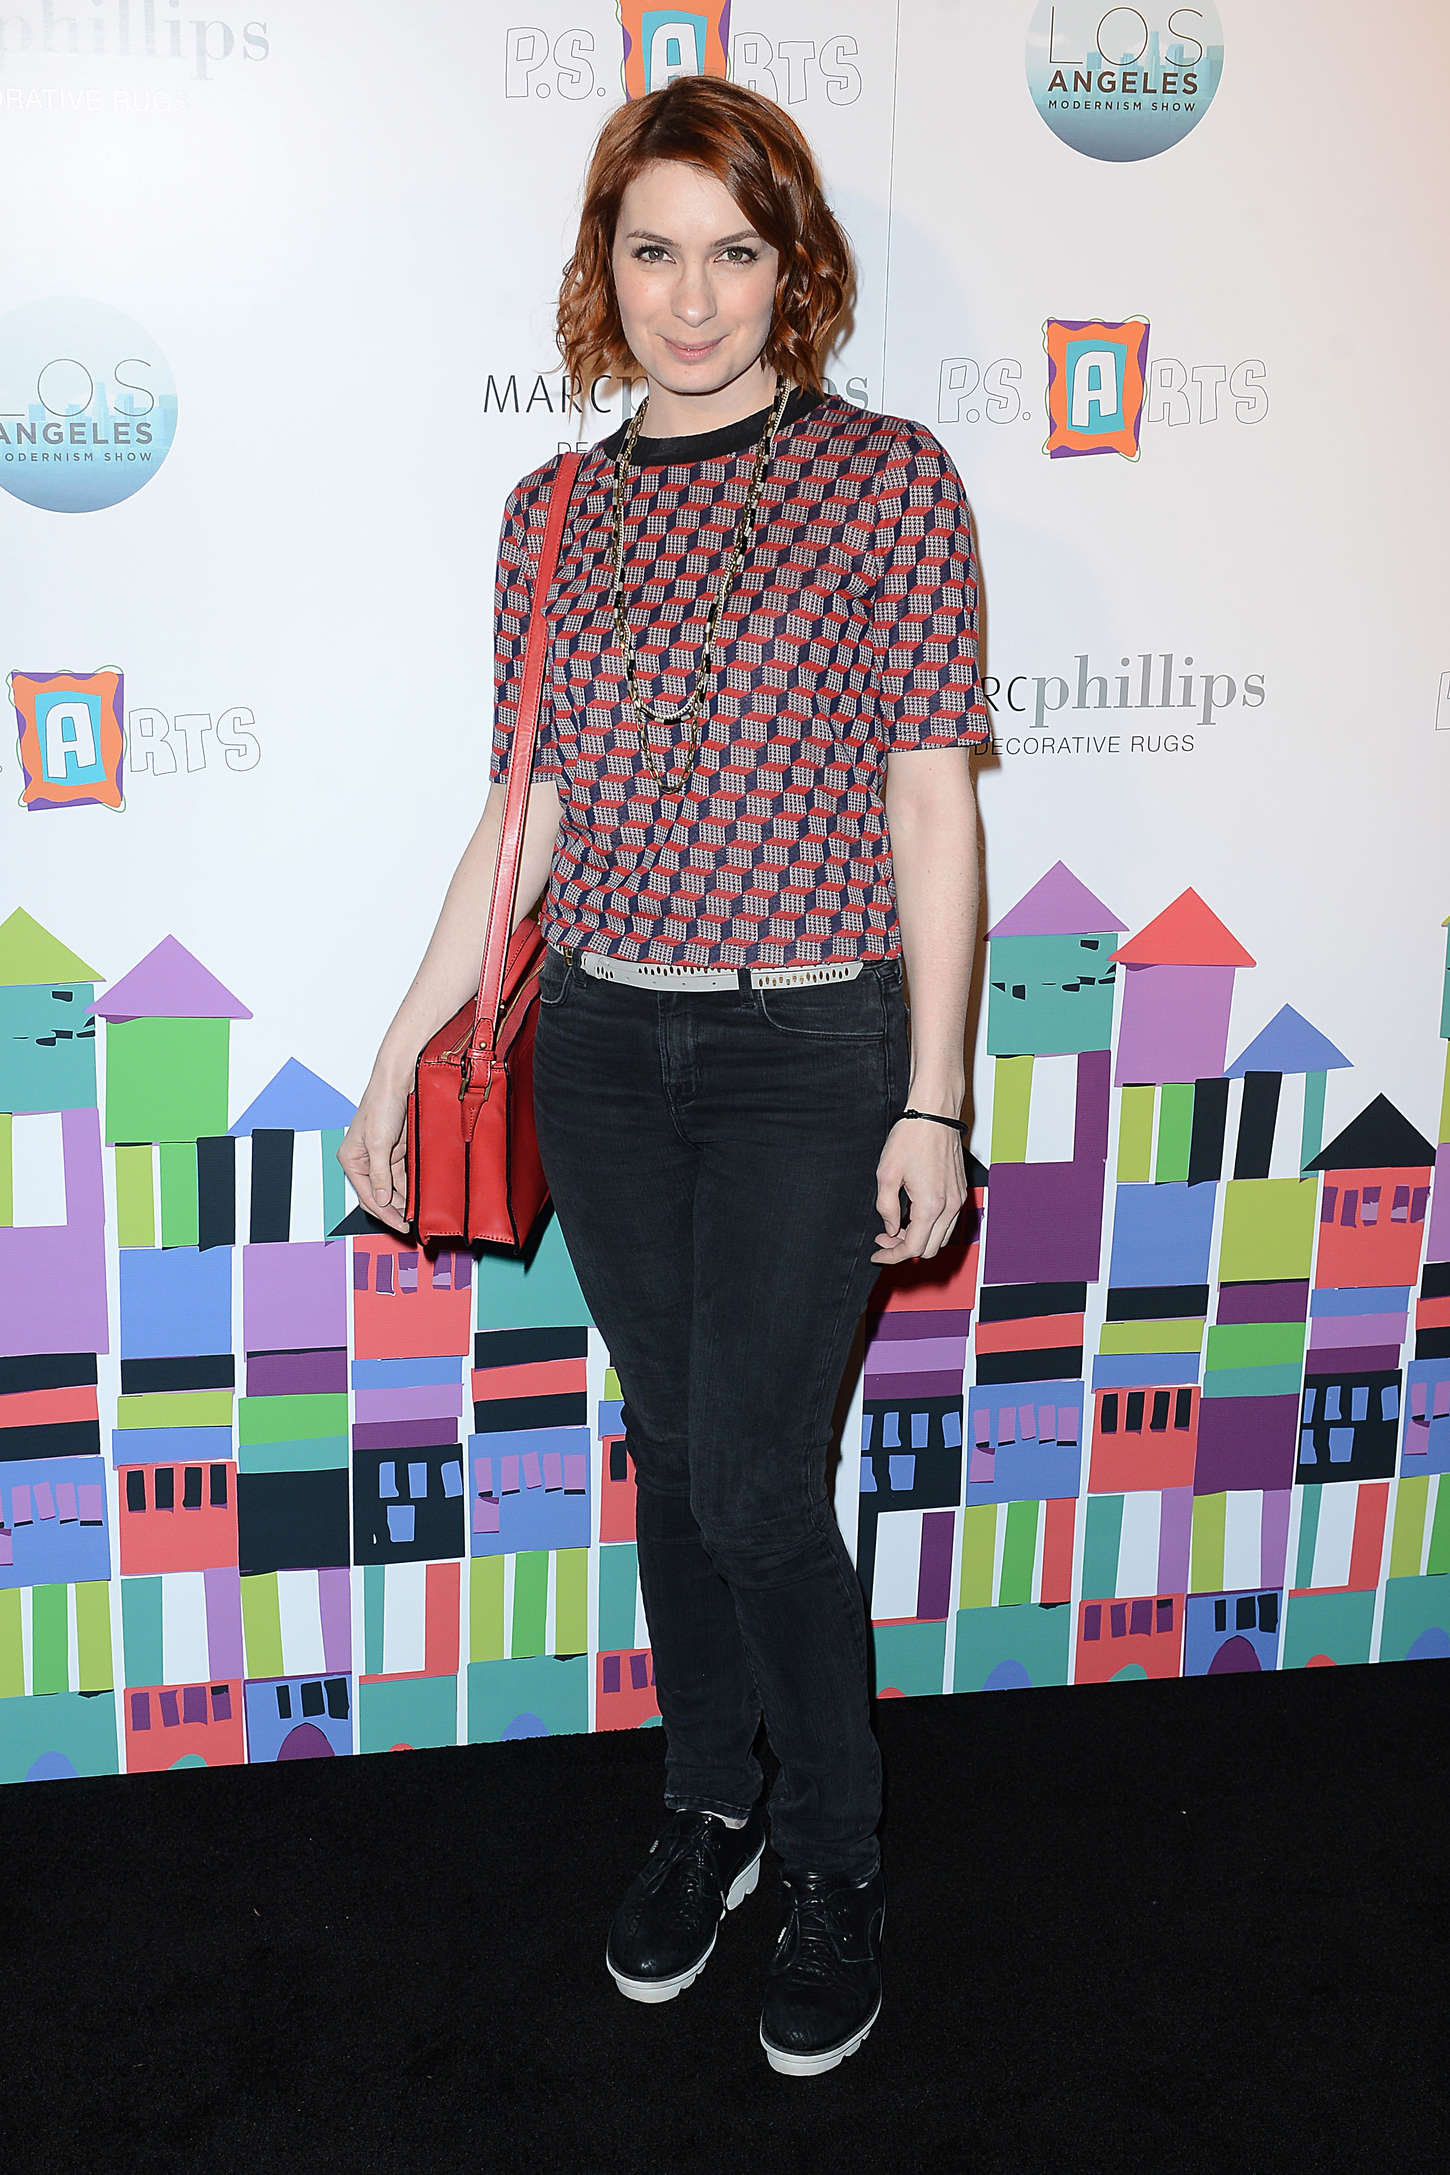 Felicia Day PS ARTS Presents Los Angeles Modernism Opening Night Party in Culver City-1